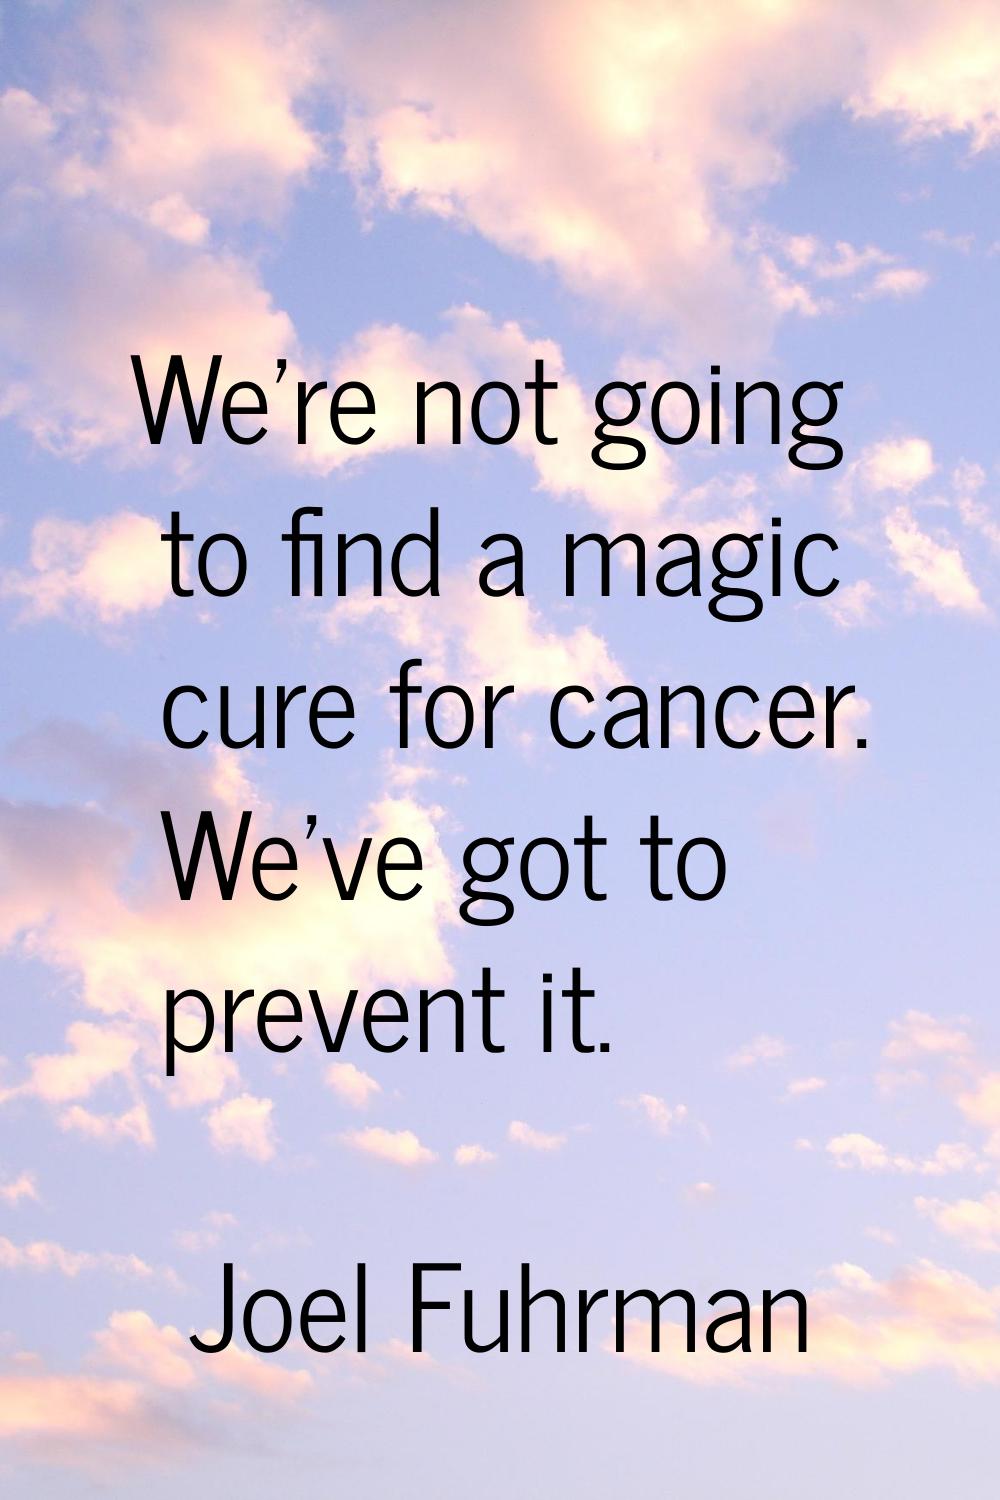 We're not going to find a magic cure for cancer. We've got to prevent it.